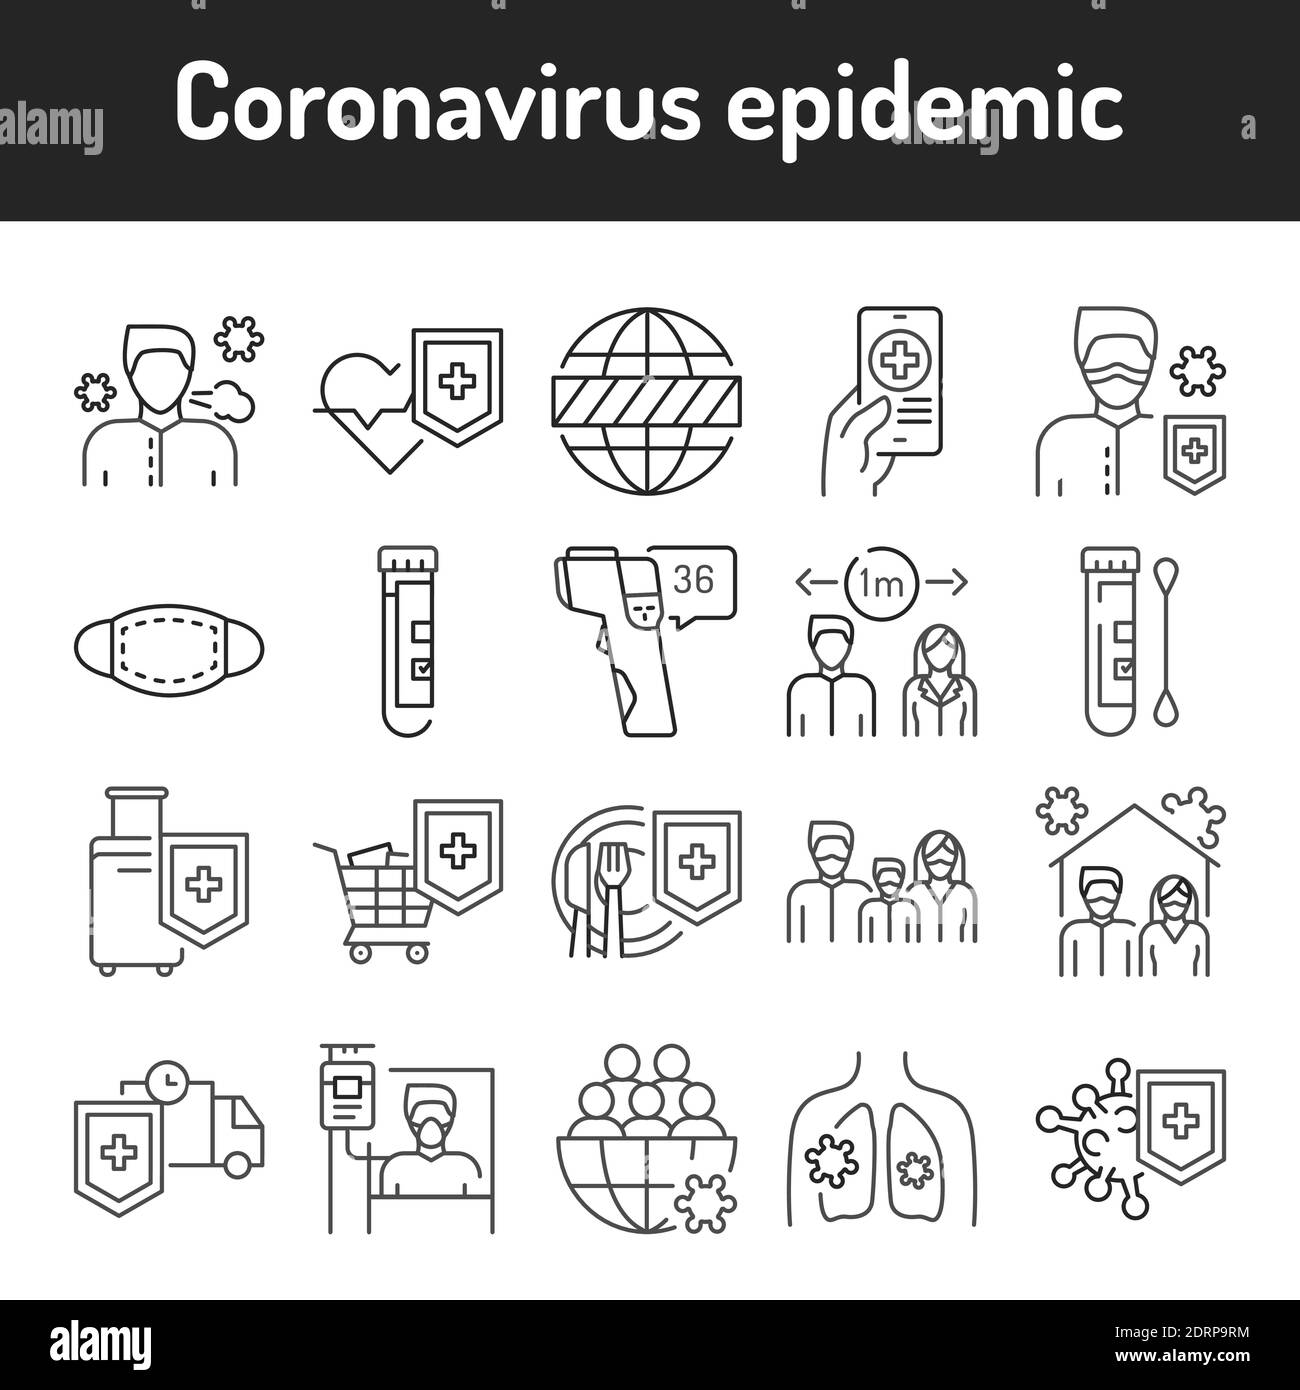 Coronavirus epidemic color line icons set. Pictograms for web page, mobile app, promo. Stock Vector